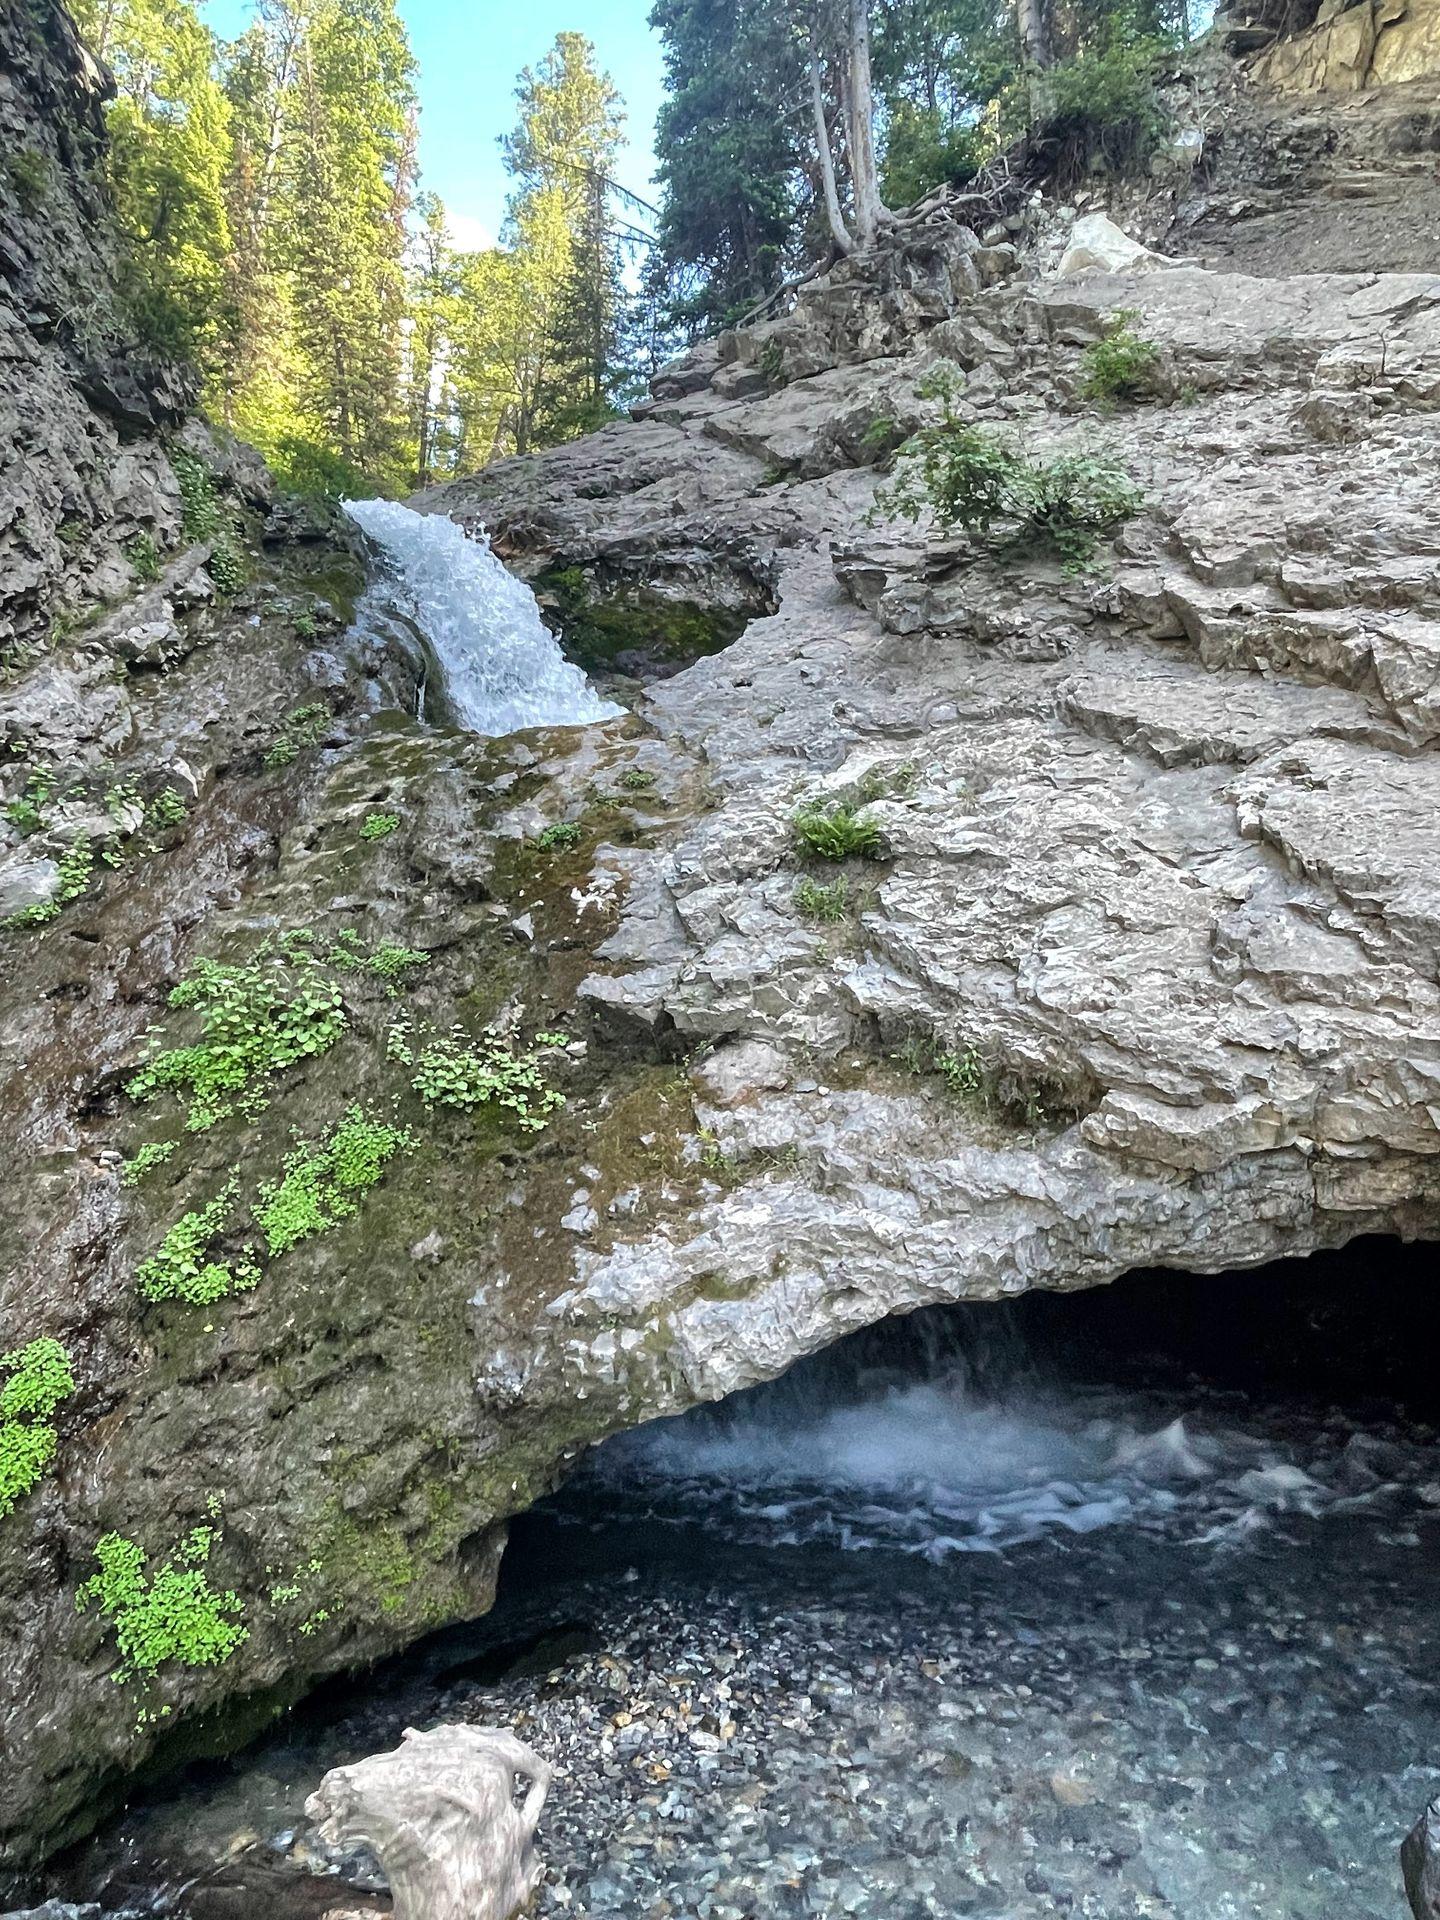 Donut Falls, where water flows into a round gap in the rock.